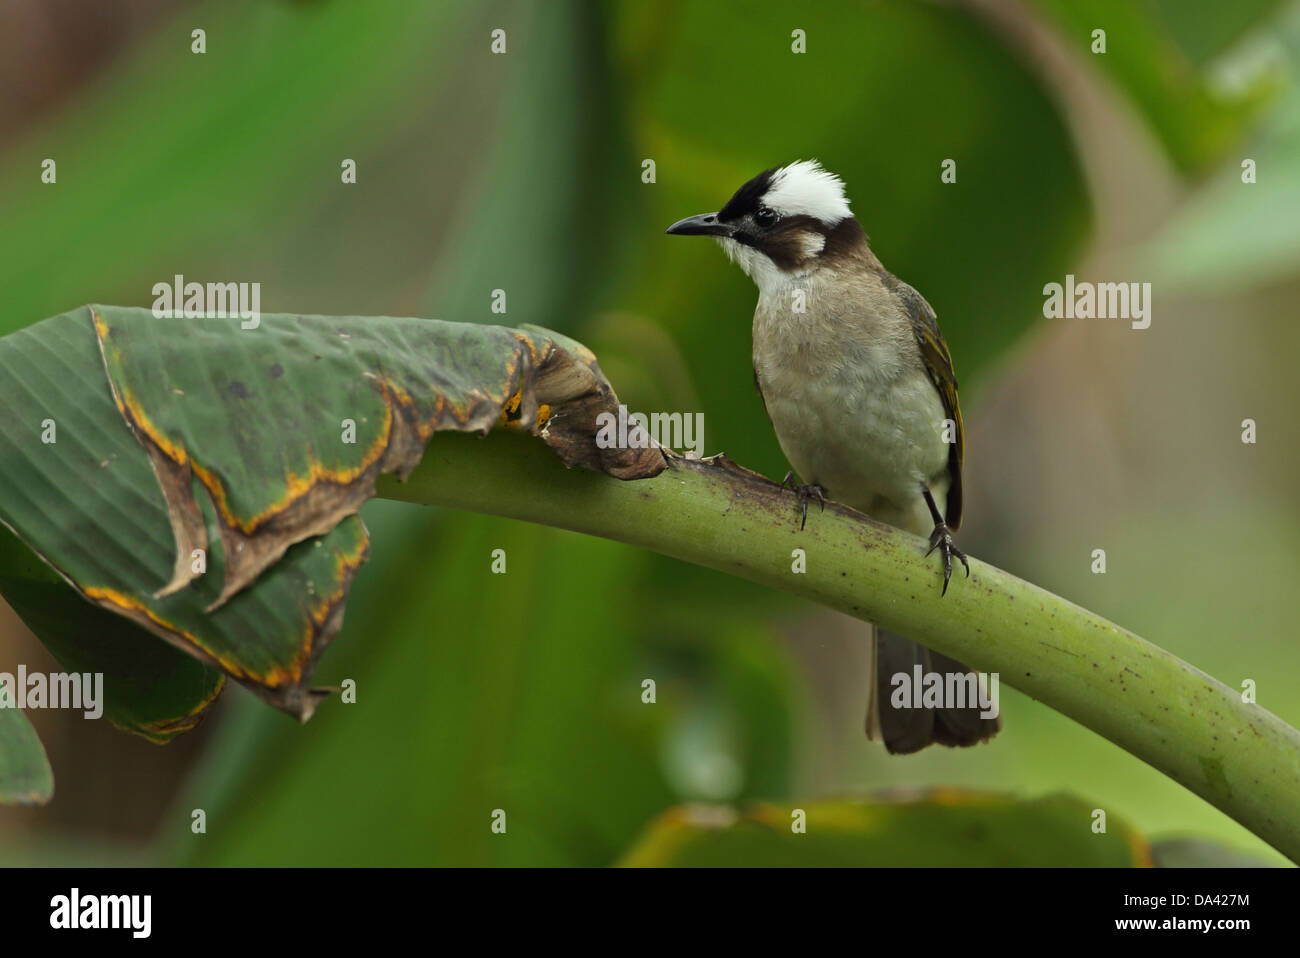 Chinese Bulbul (Pycnonotus sinensis formosae) adult, perched on leaf stem, Taiwan, April Stock Photo